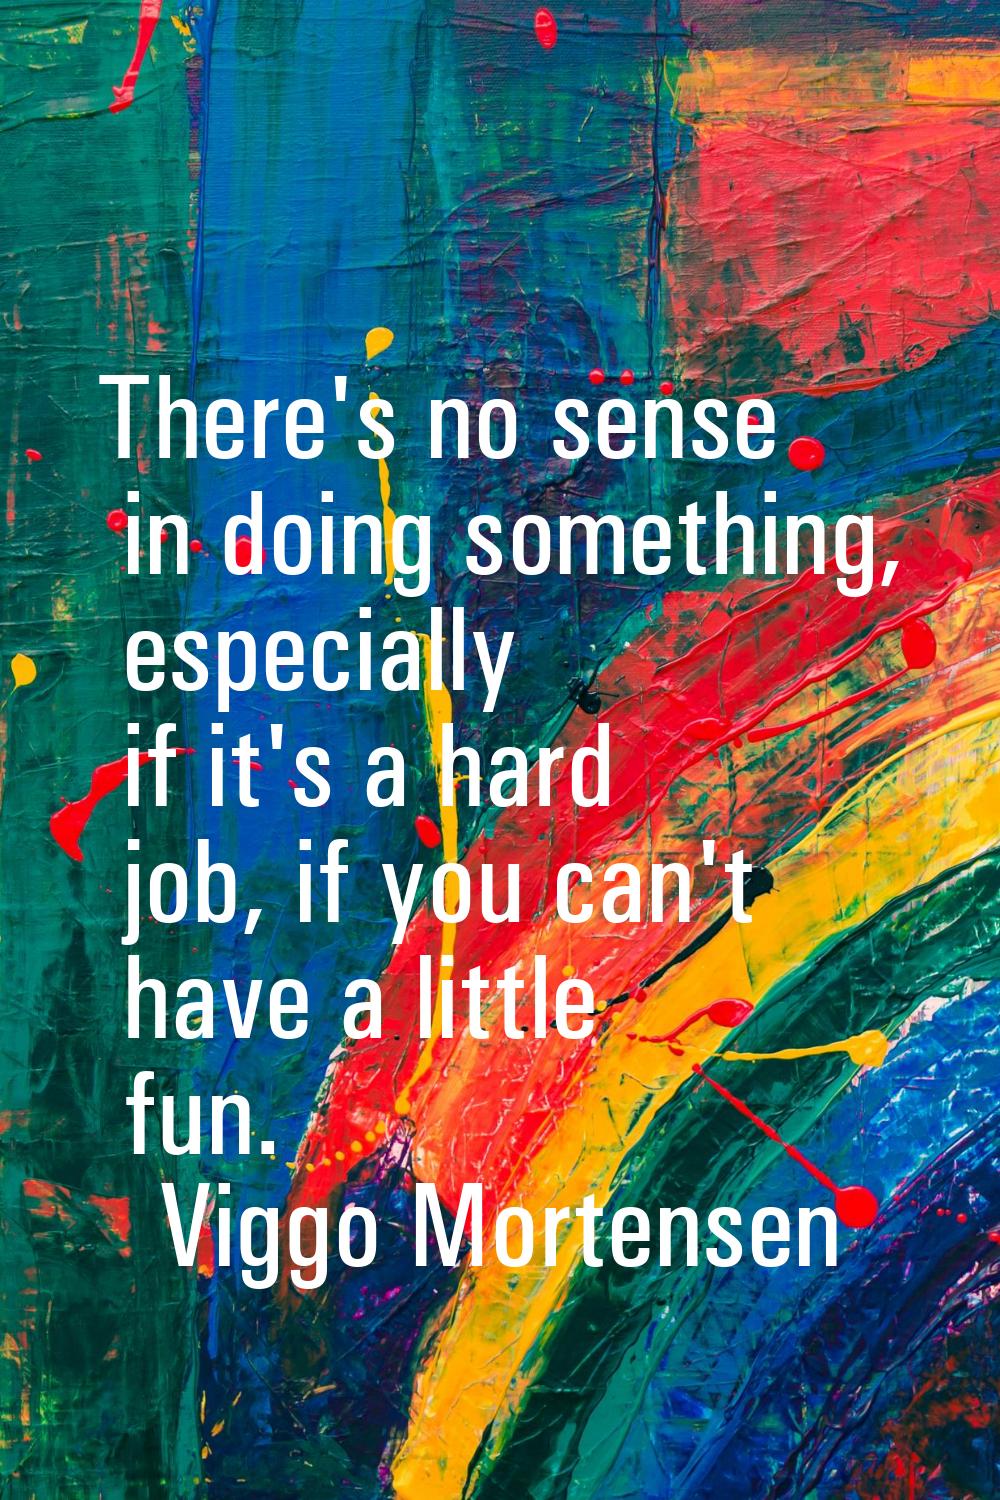 There's no sense in doing something, especially if it's a hard job, if you can't have a little fun.